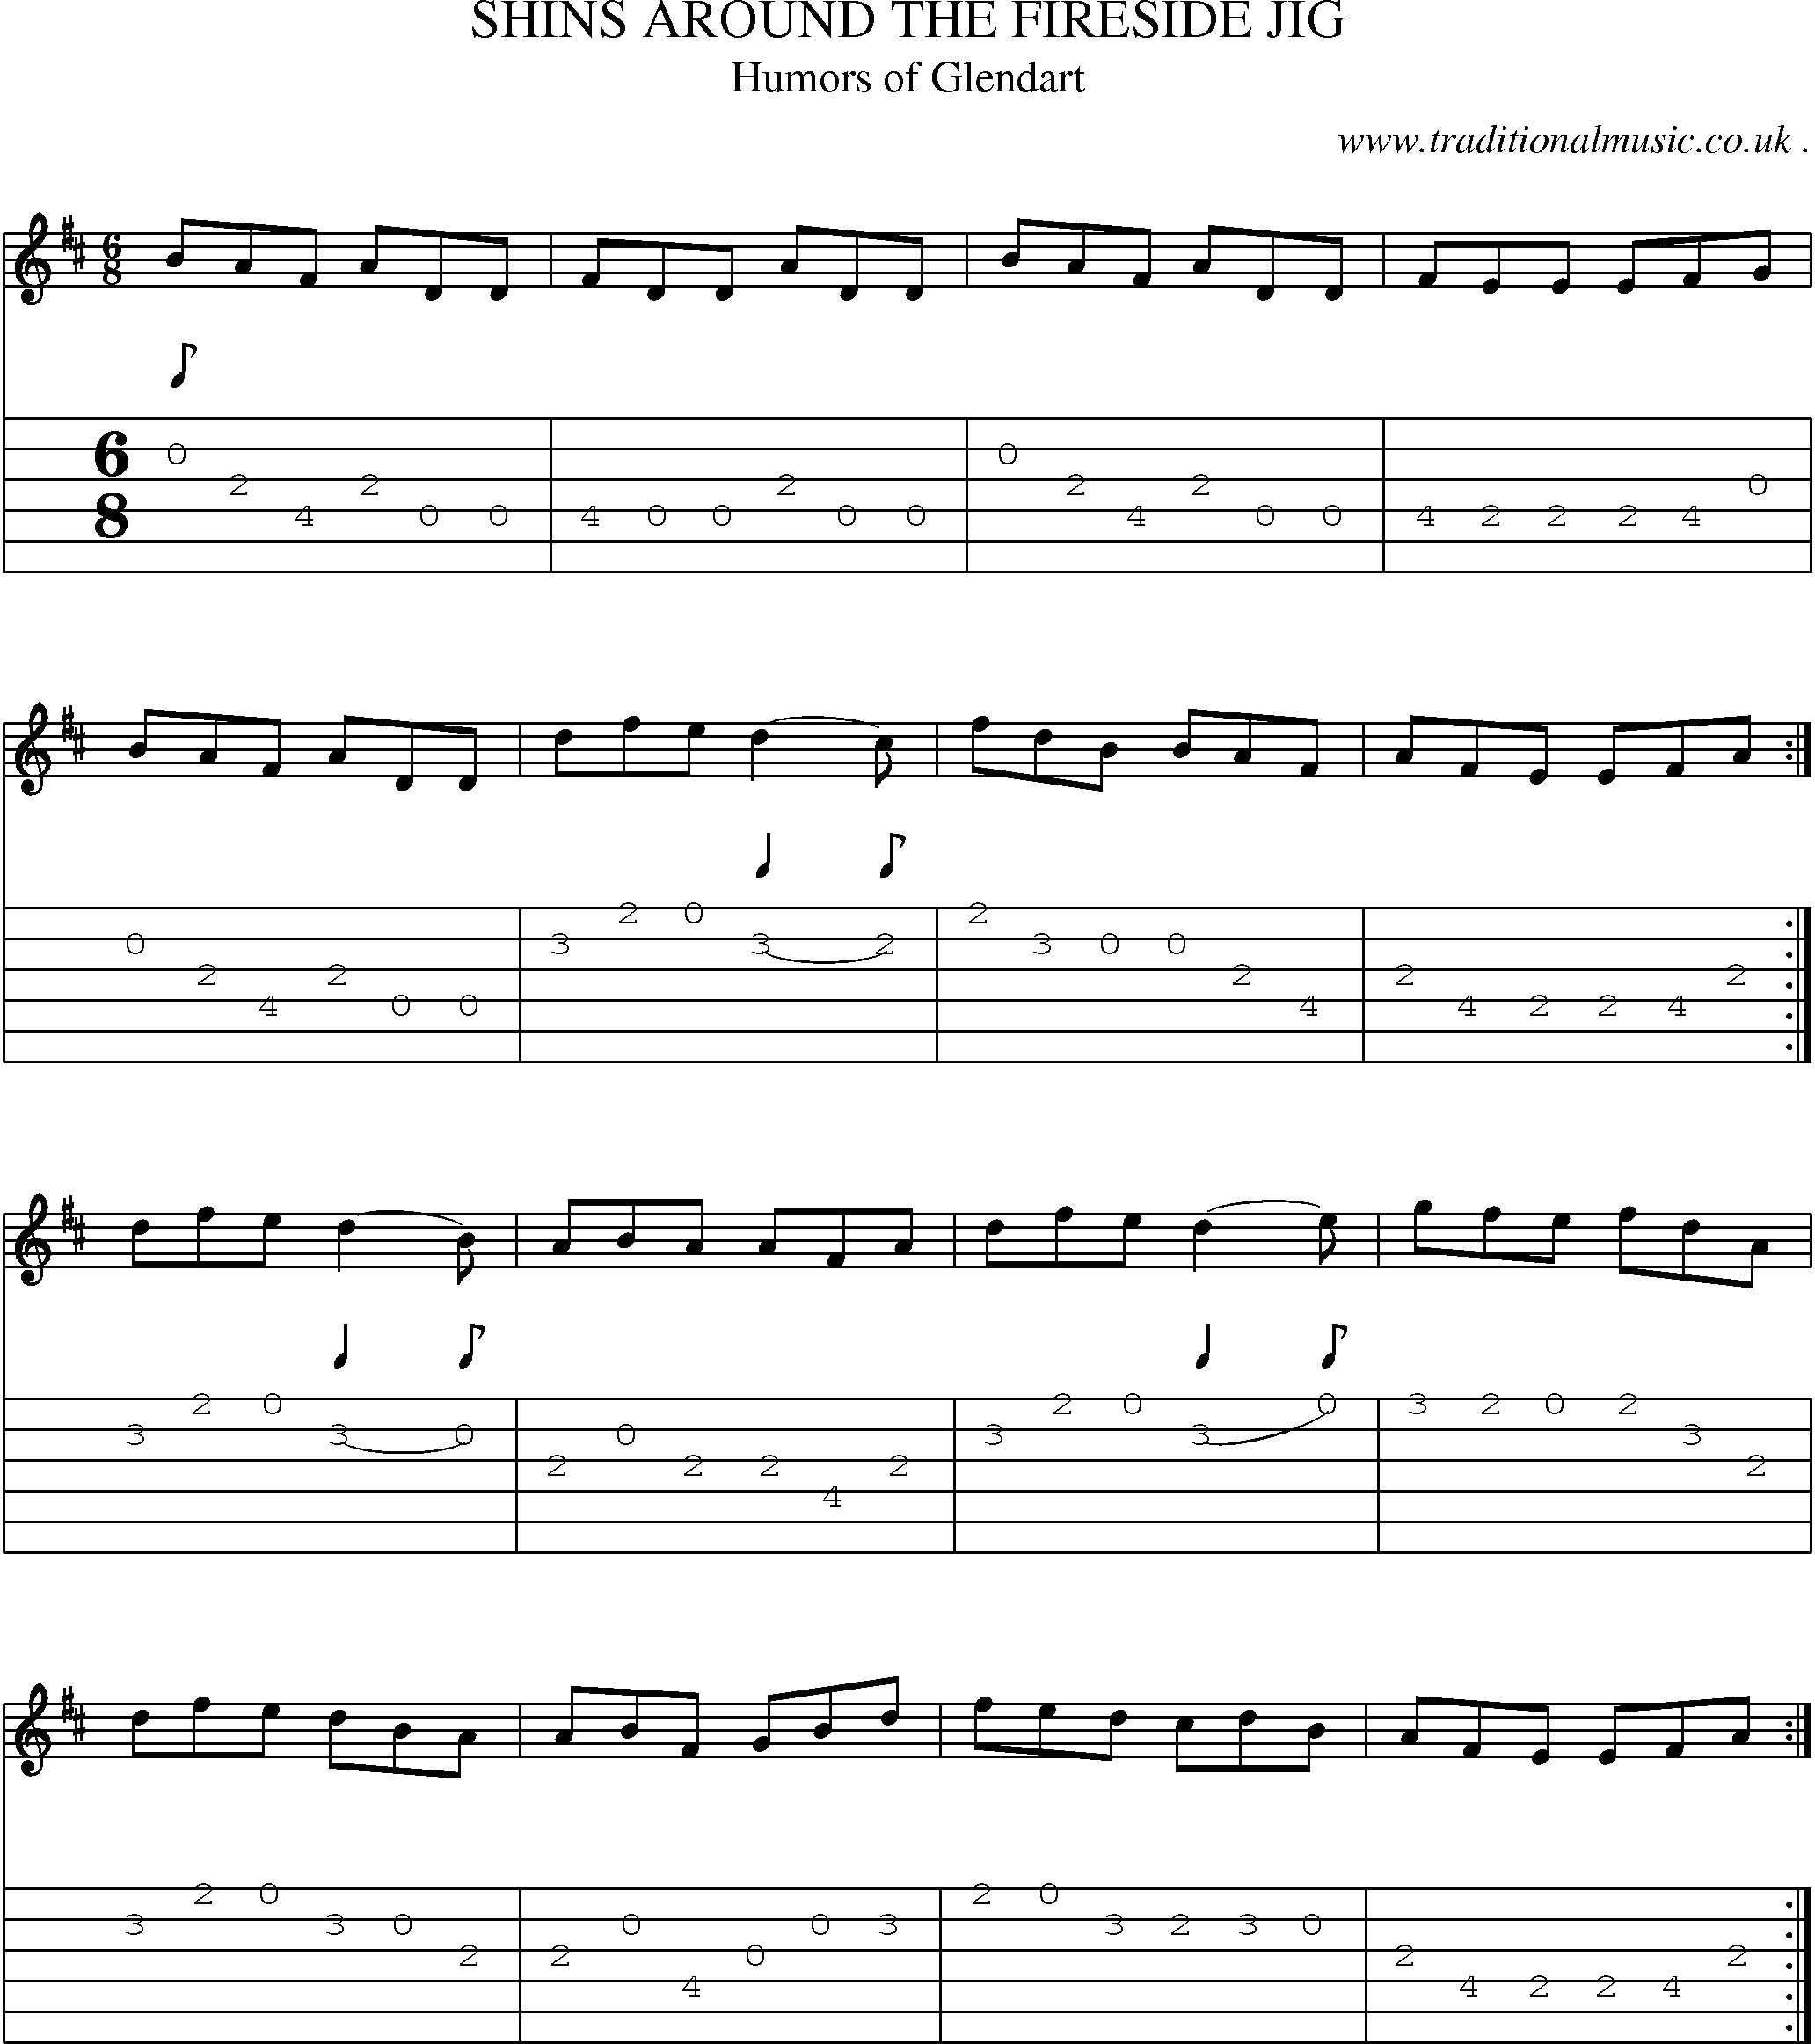 Sheet-Music and Guitar Tabs for Shins Around The Fireside Jig